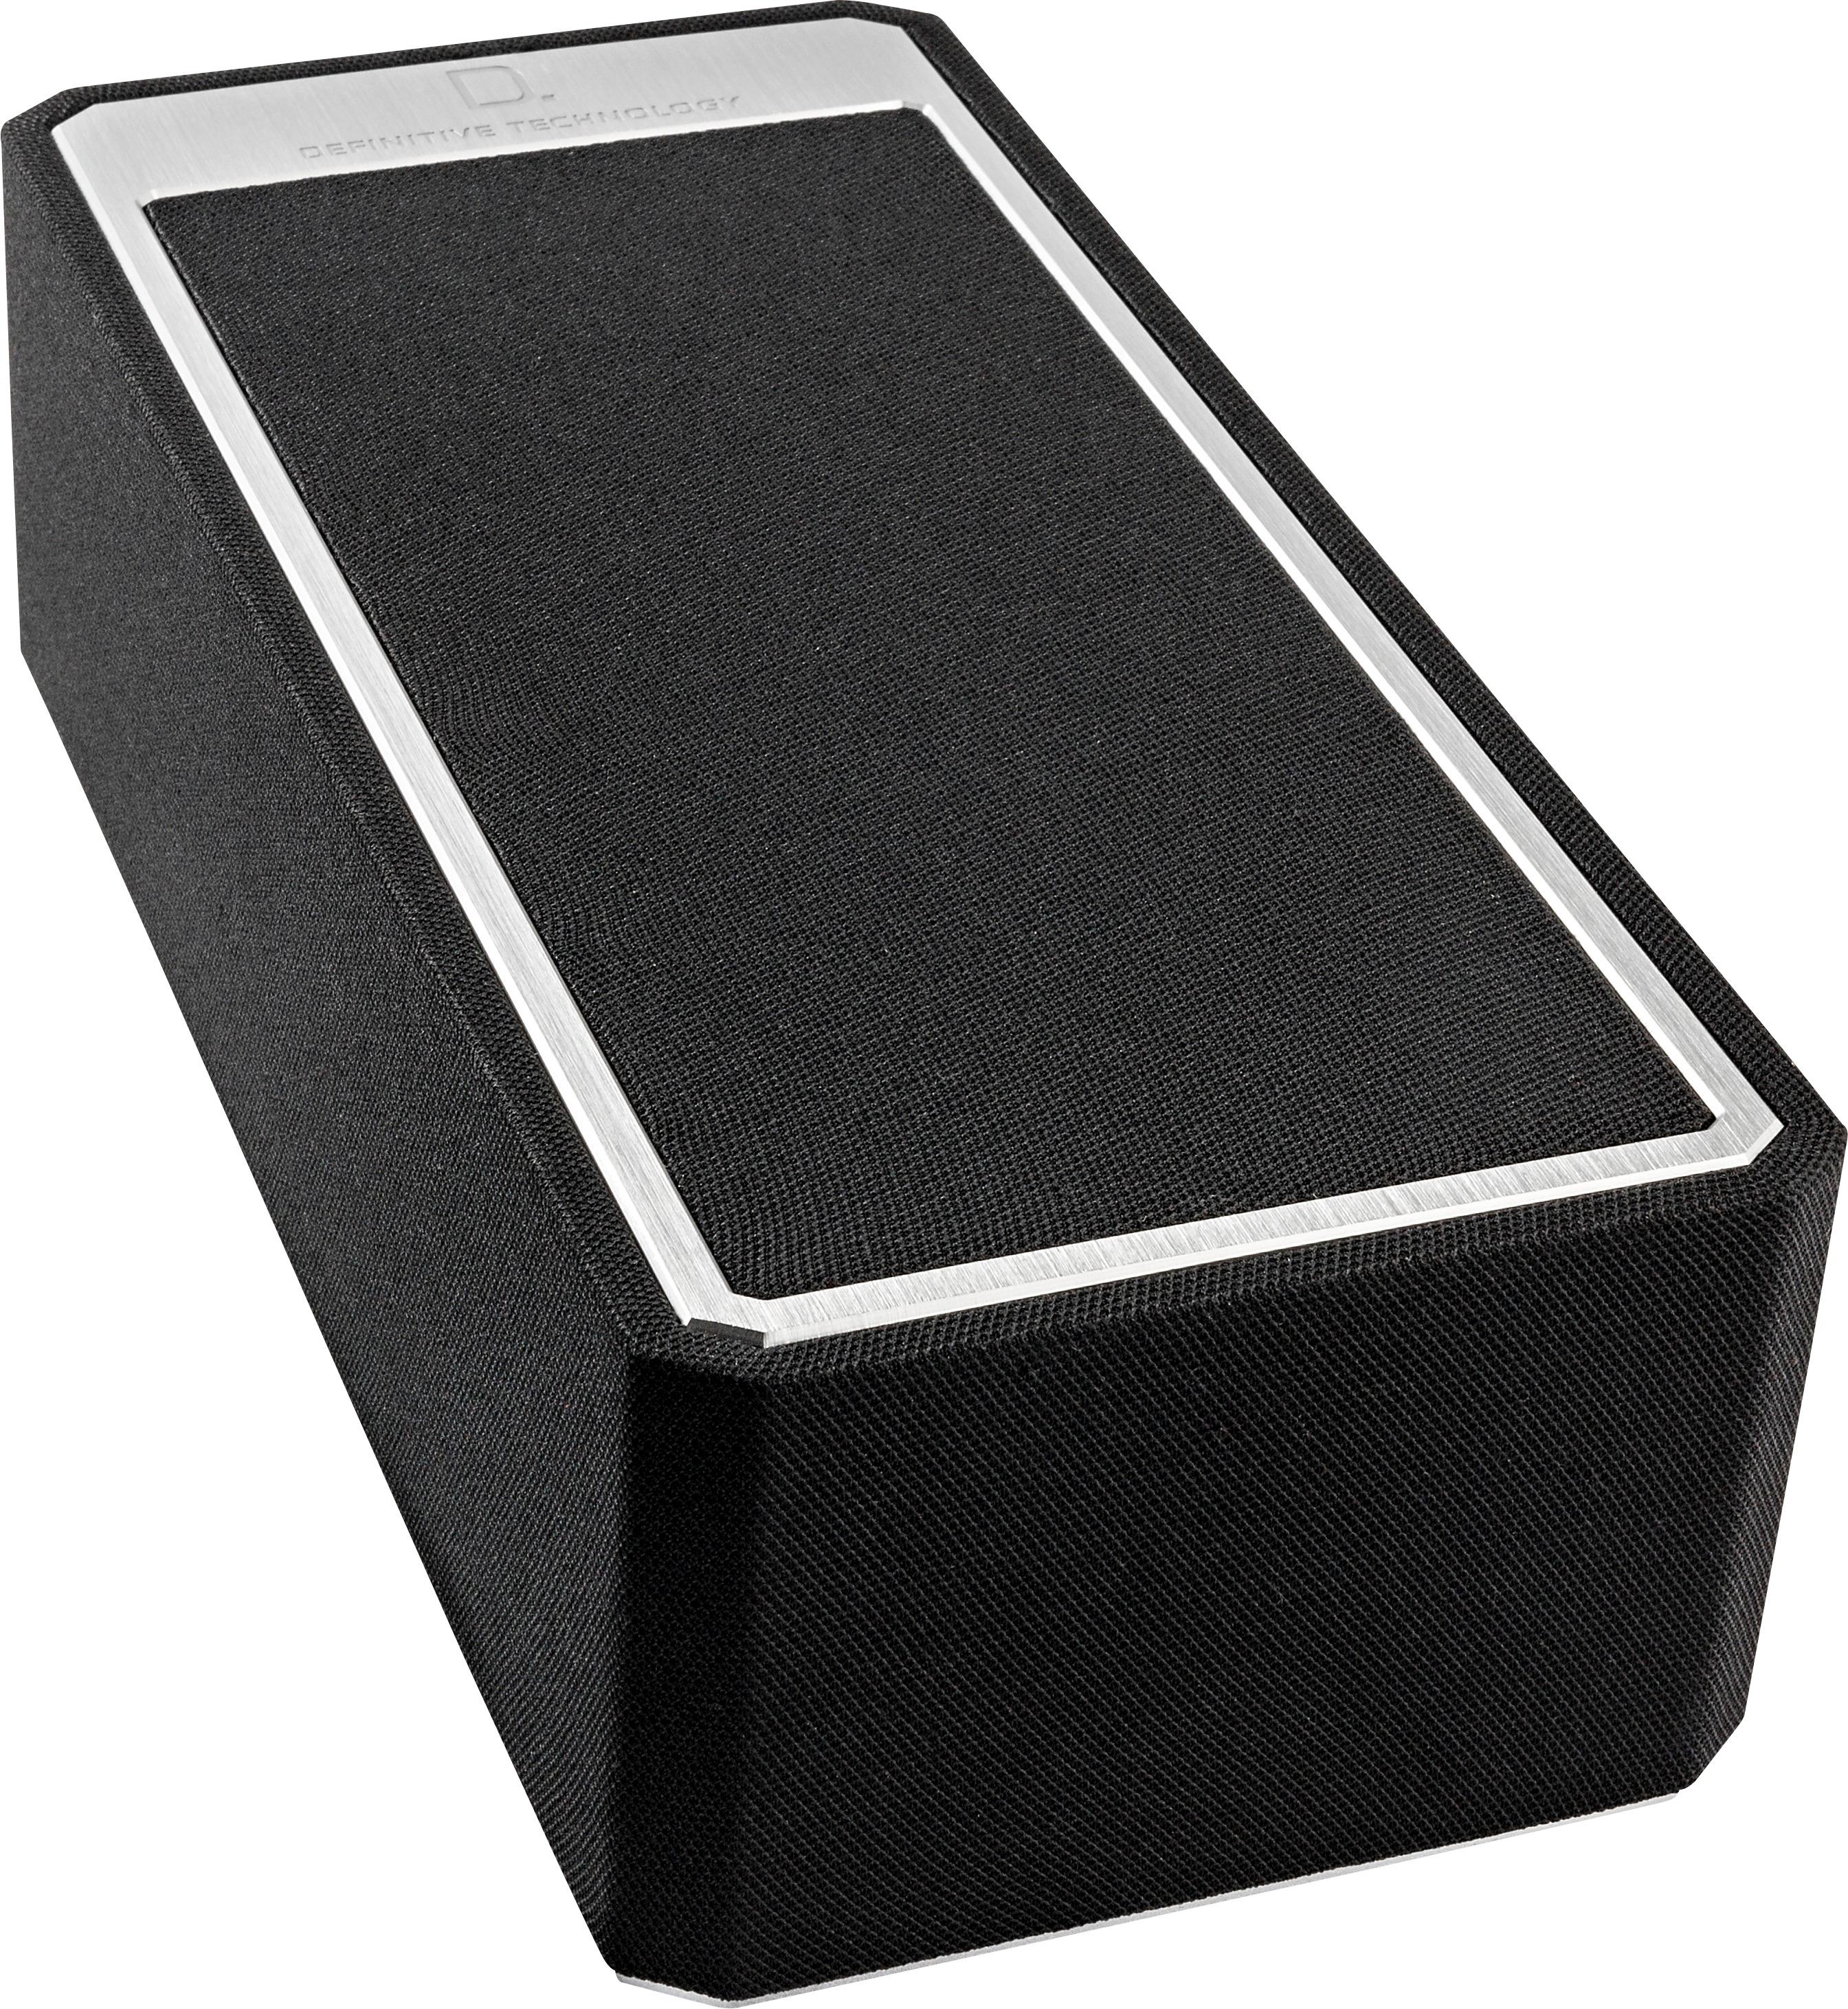 Angle View: Definitive Technology - Demand Series D5C Center-Channel Speaker - Piano Black